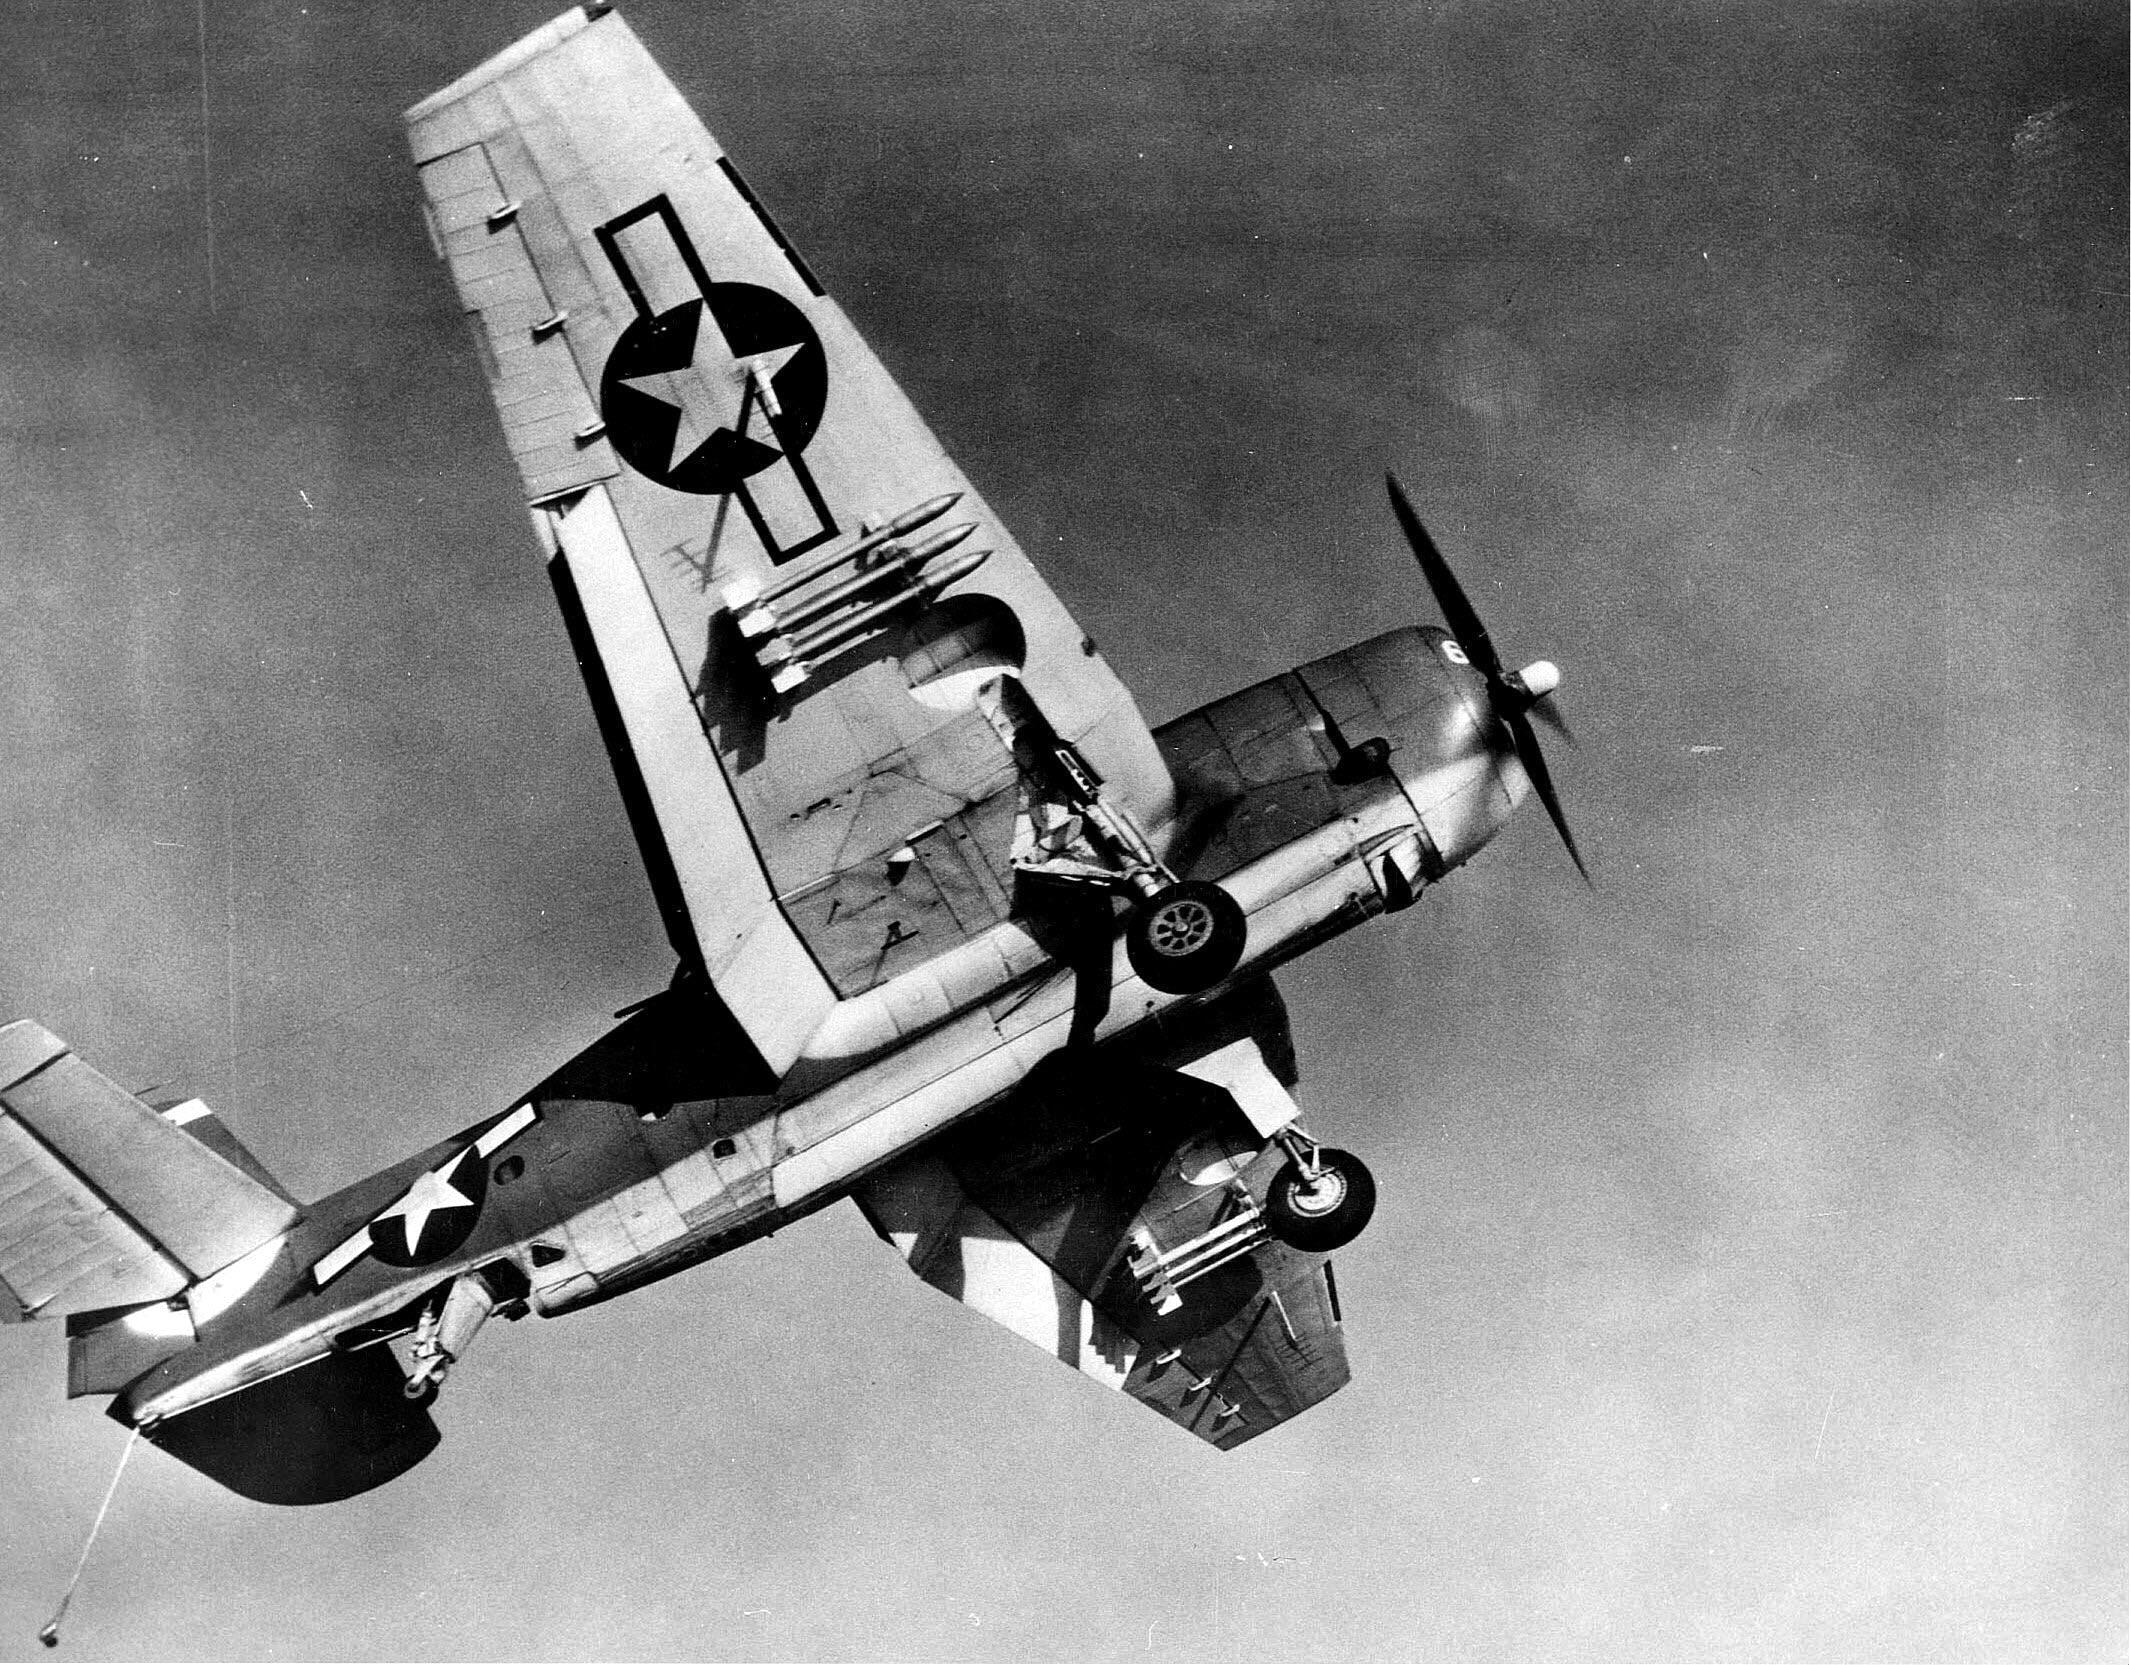 Underside view of an Eastern Aviation TBM-3 Avenger armed with FFAR rockets, the predecessor of the HVAR air-to-surface rockets, early 1944.